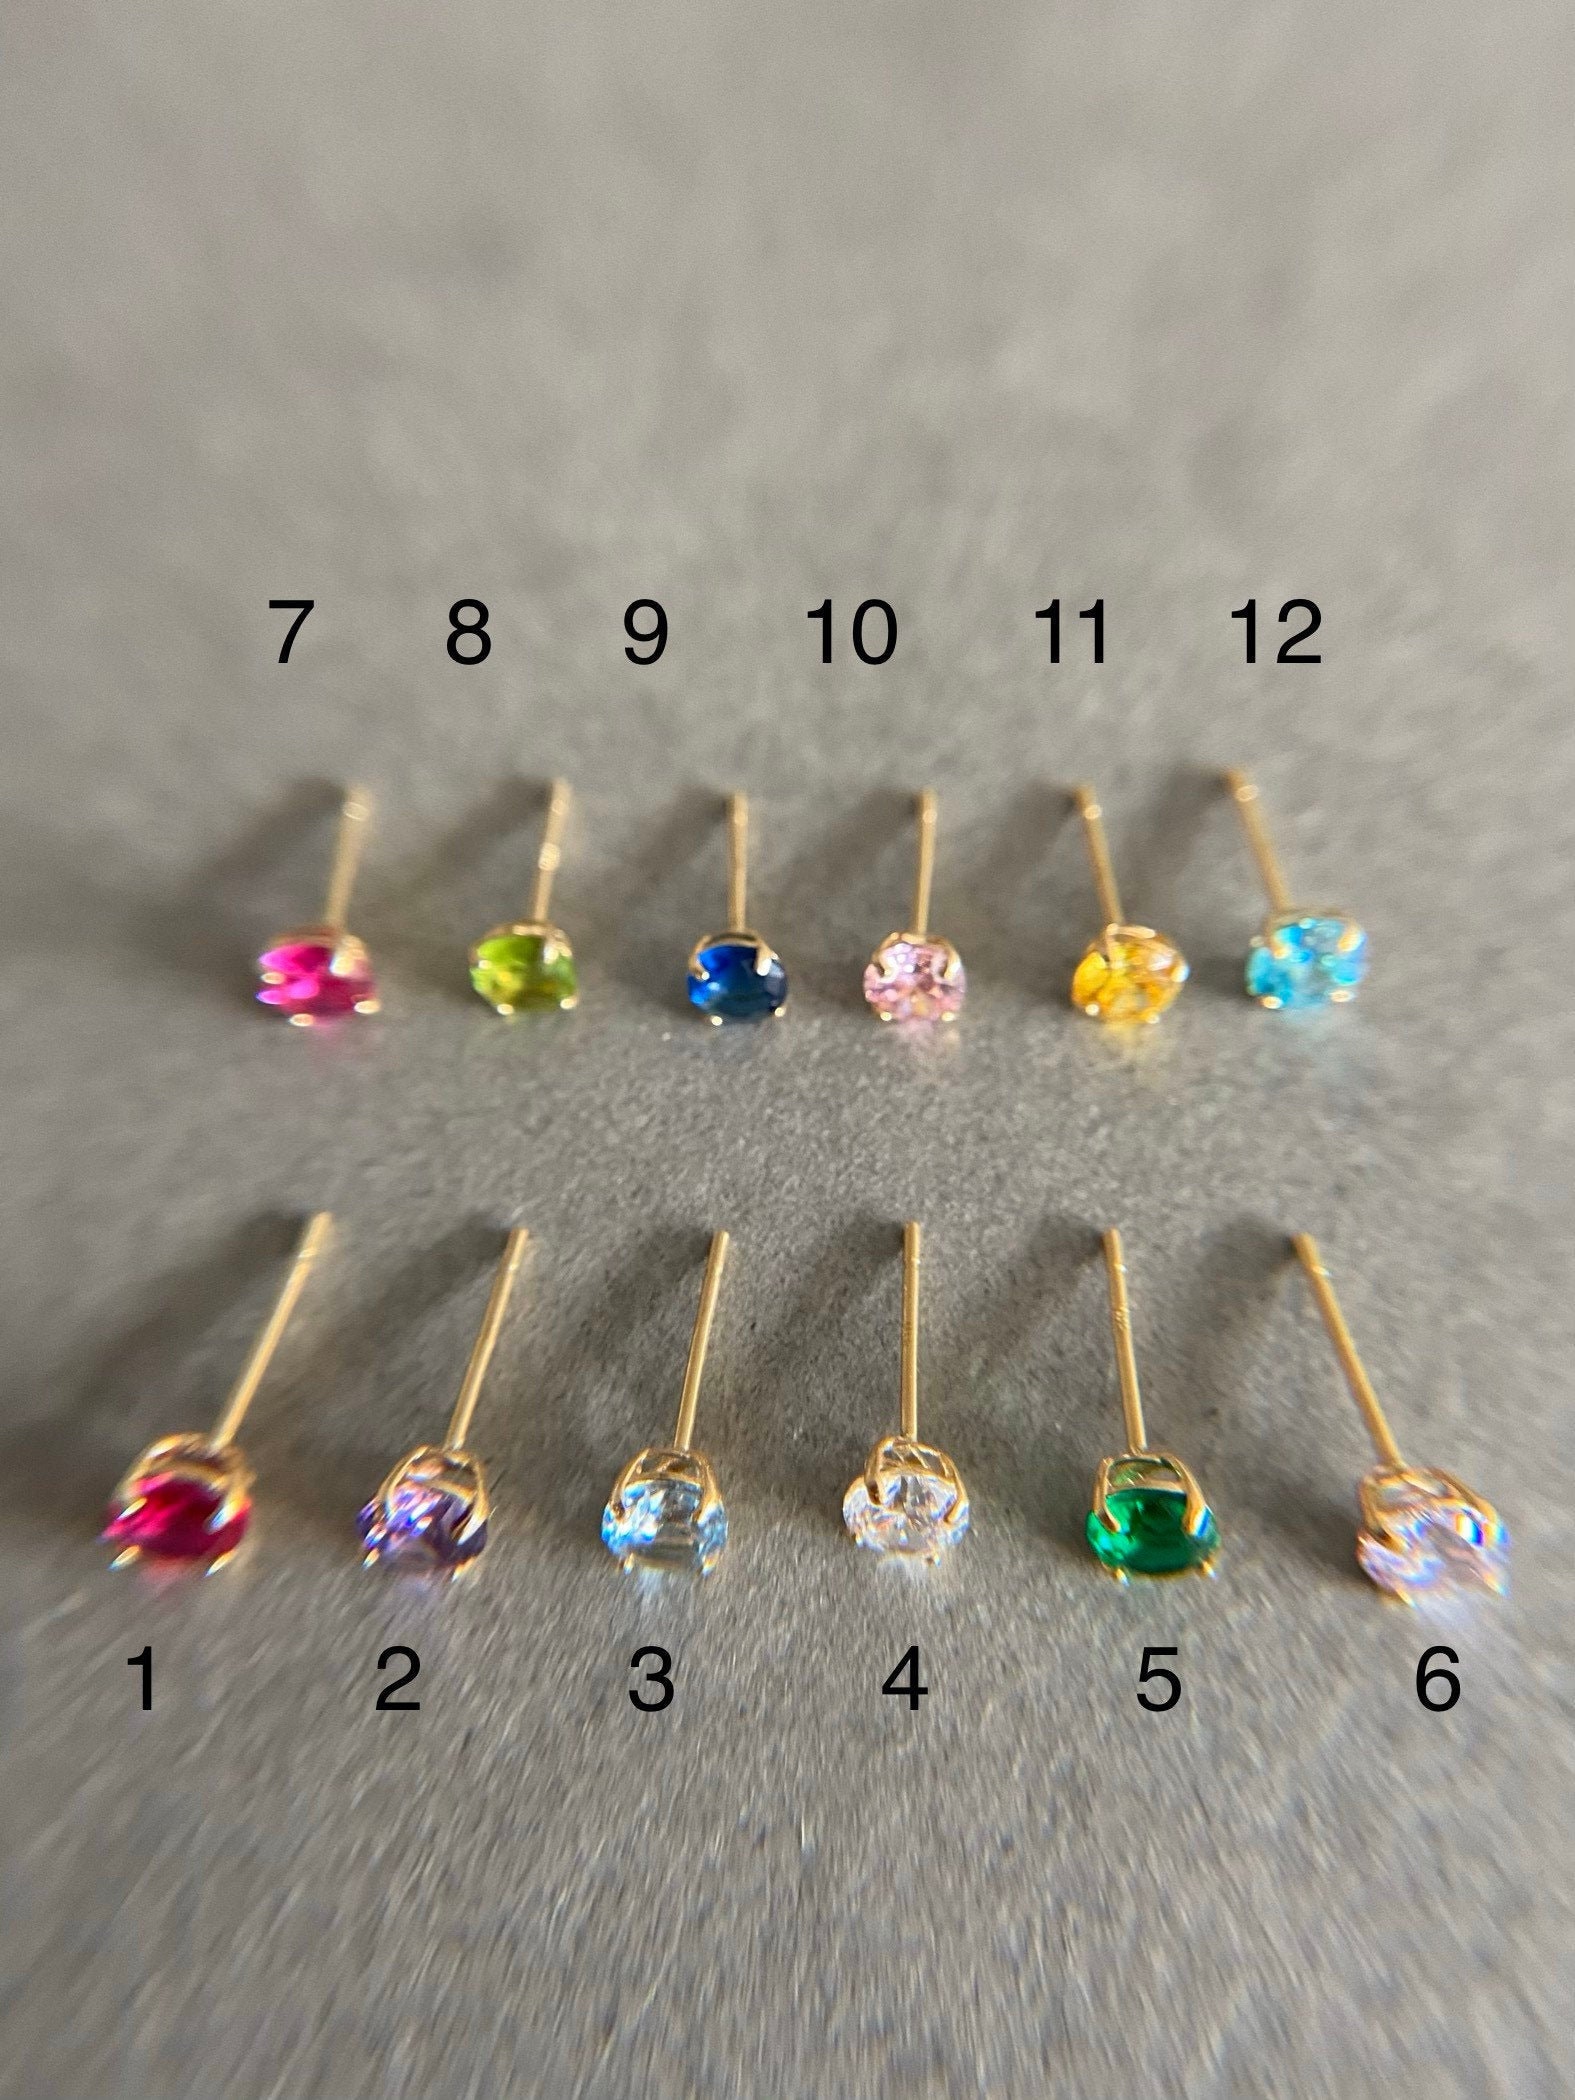 Baby Toddler 1.5mm Genuine Birthstone Stud Earrings with Screw Back, Solid 14K Yellow Gold, Kids Birthstone Studs, Nickel Free Yellow Gold